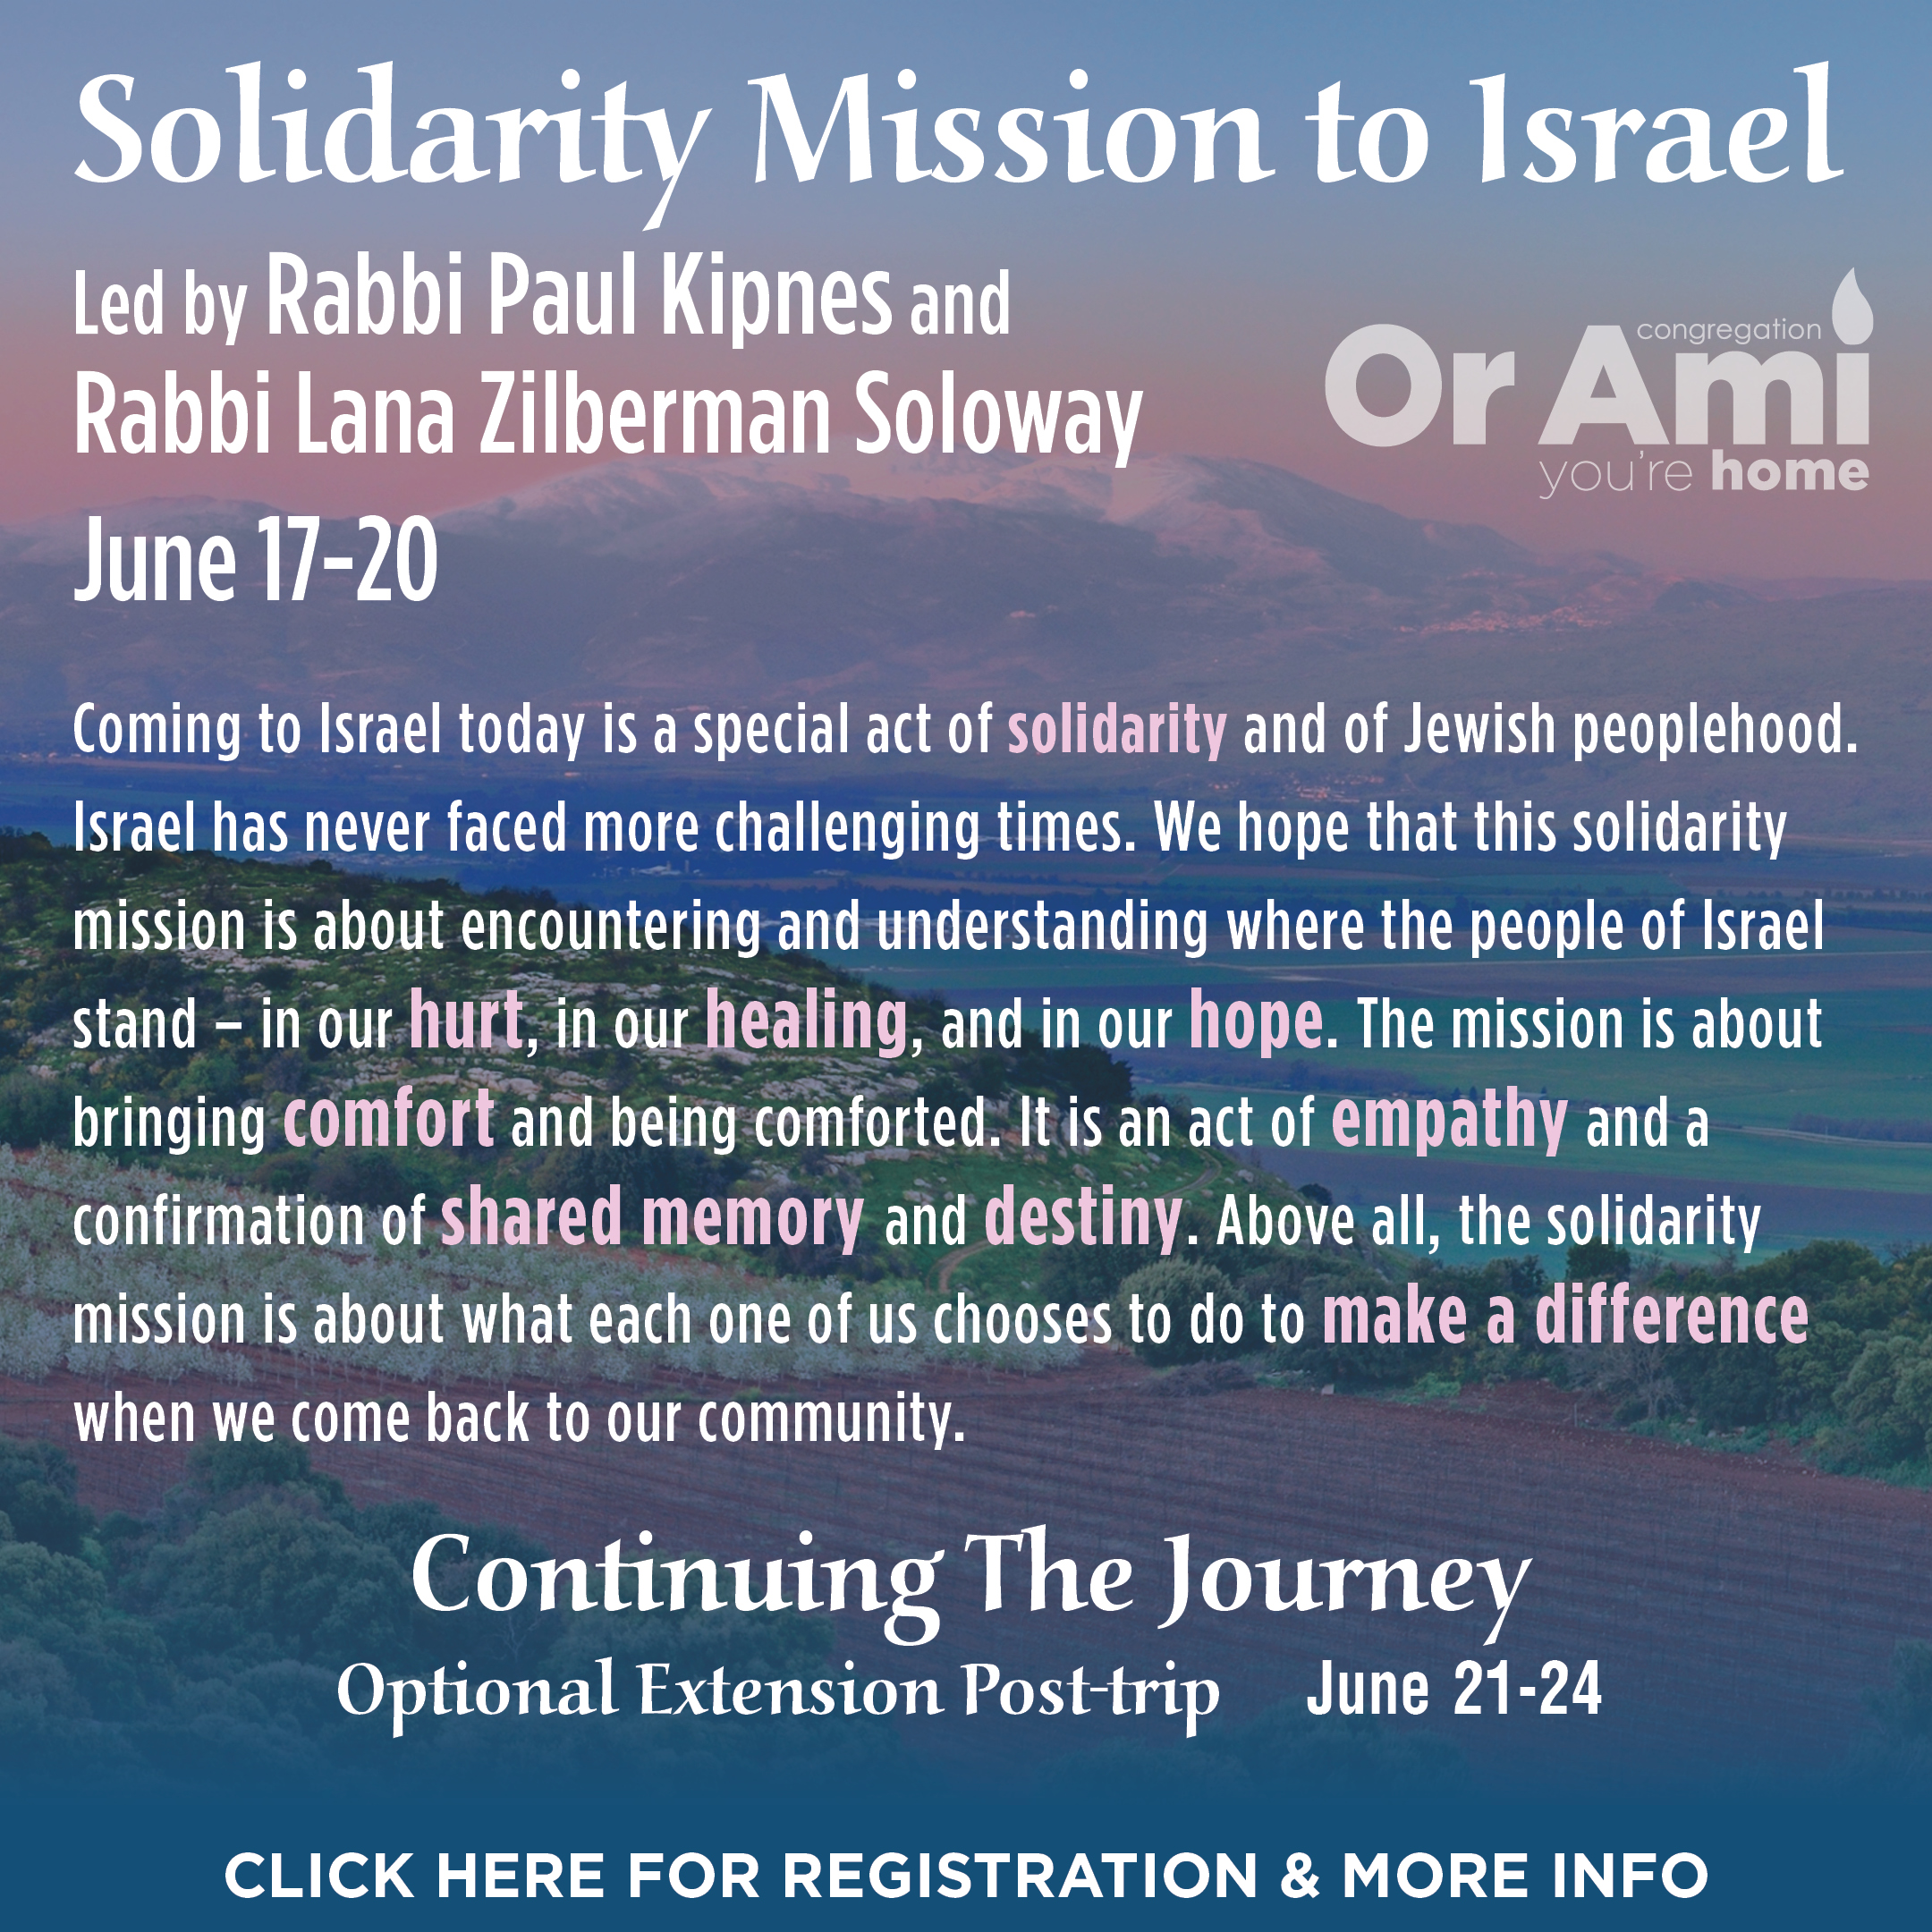 *Or Ami Solidarity Mission to Israel CLICK